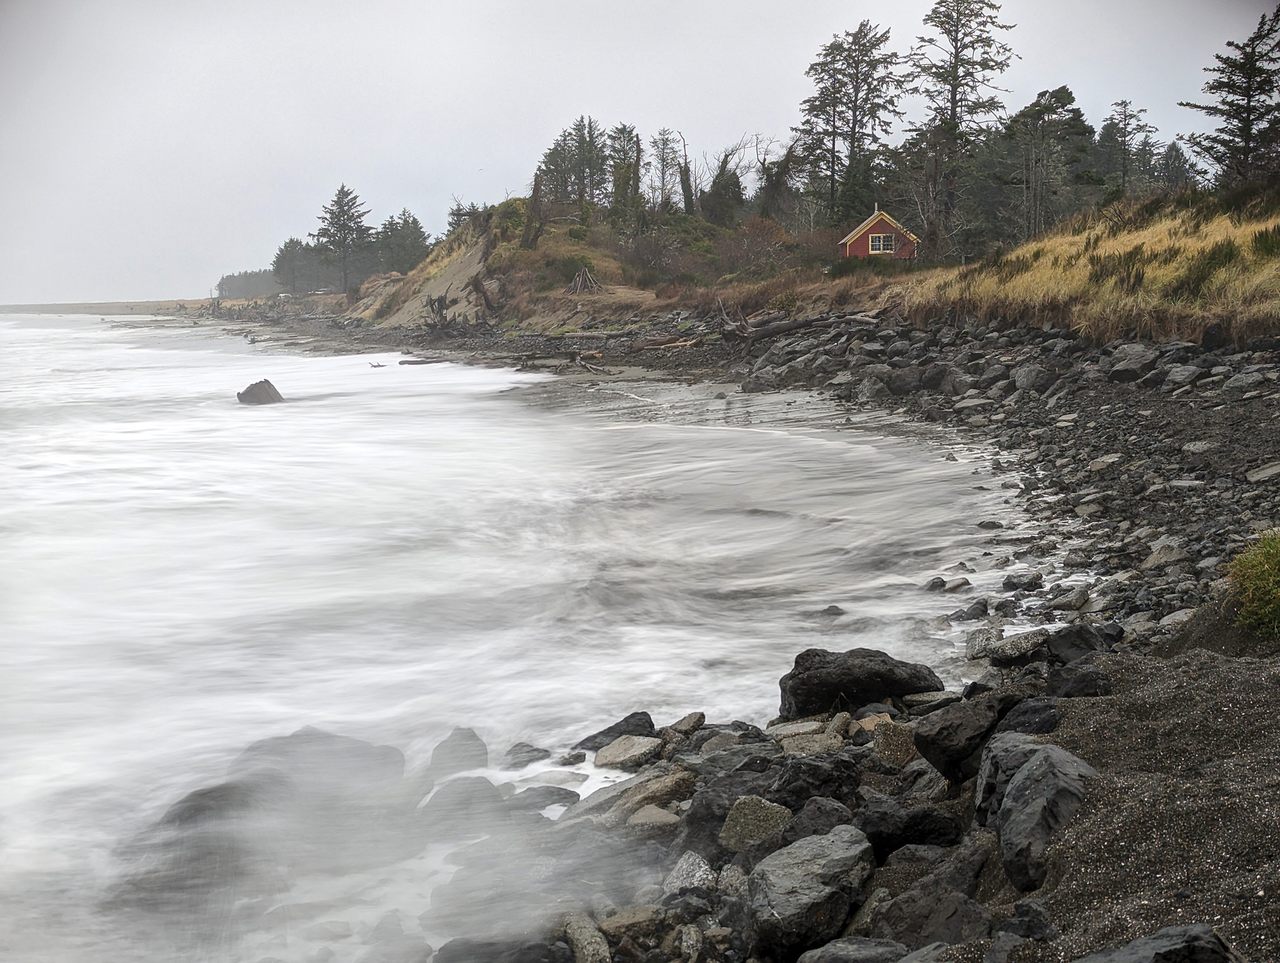 Washington’s seasonal king tides, shown here at Washaway Beach in November 2022, are becoming more destructive as sea levels rise. Local leaders have spread an experimental cobble berm along the shore to help stem erosion.